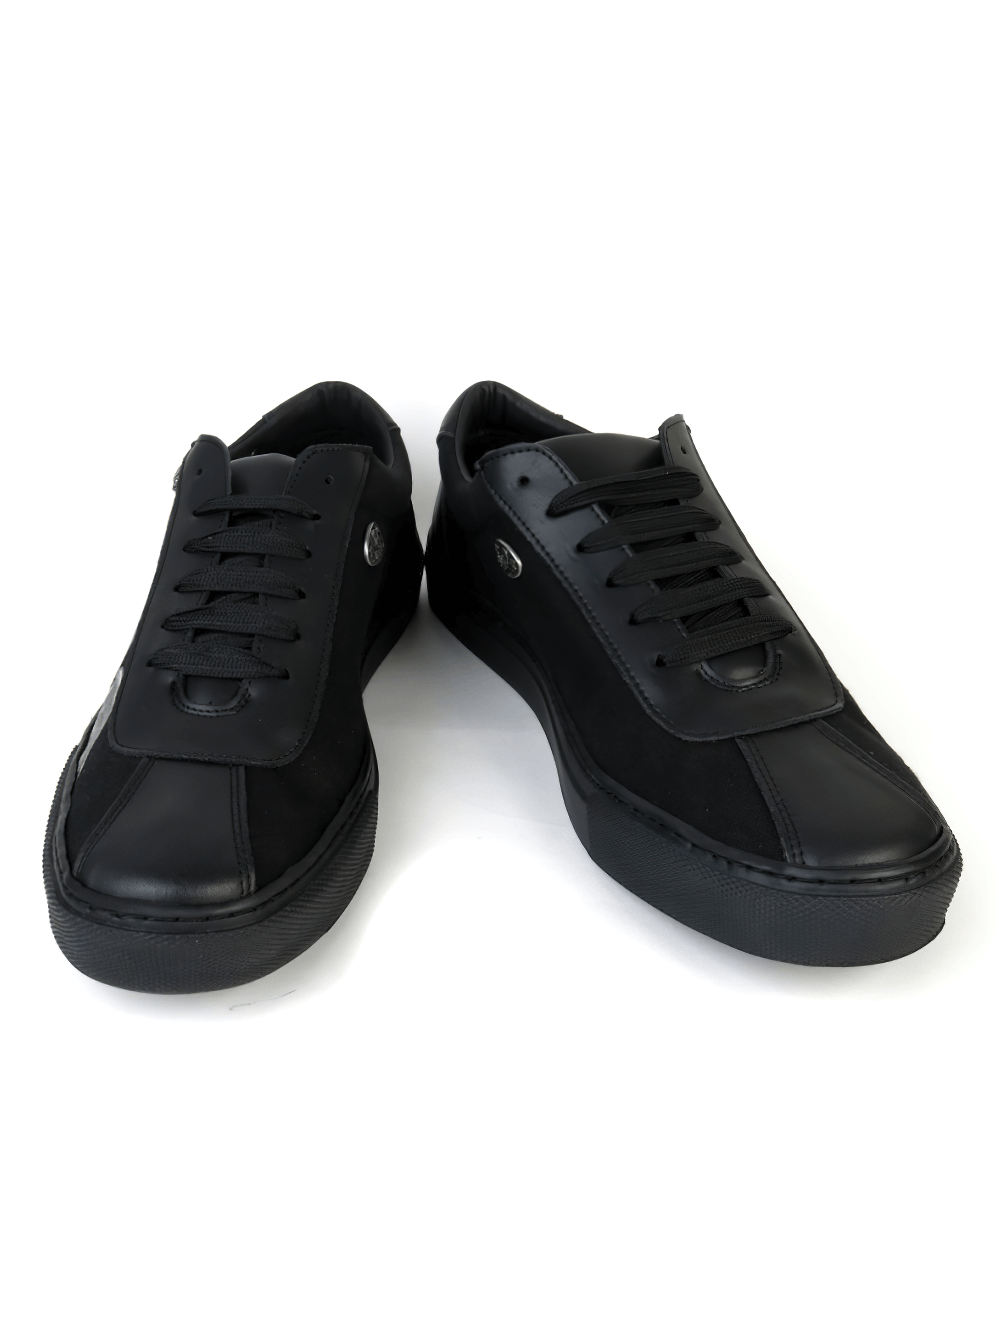 Skull and Wings Black Canvas Sneakers with Rubber Sole